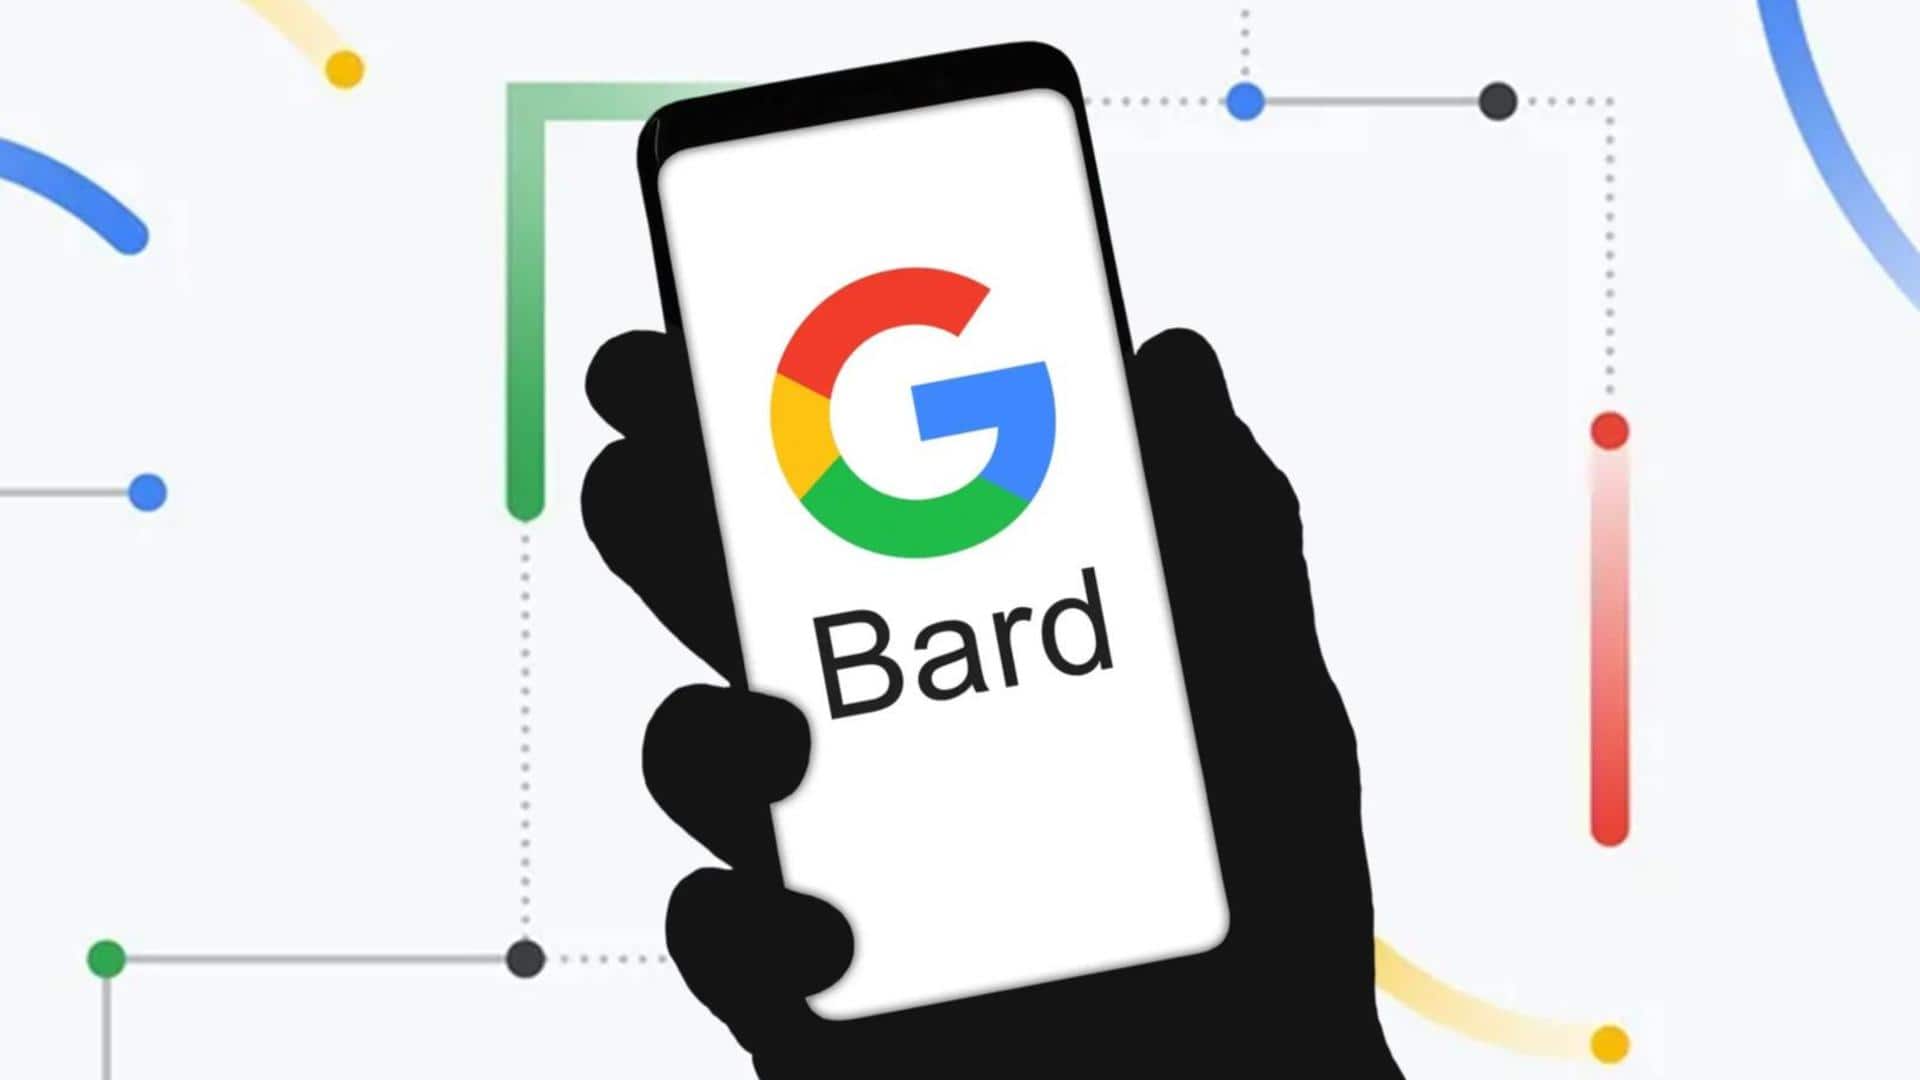 Google to introduce Bard AI widget on Pixel devices